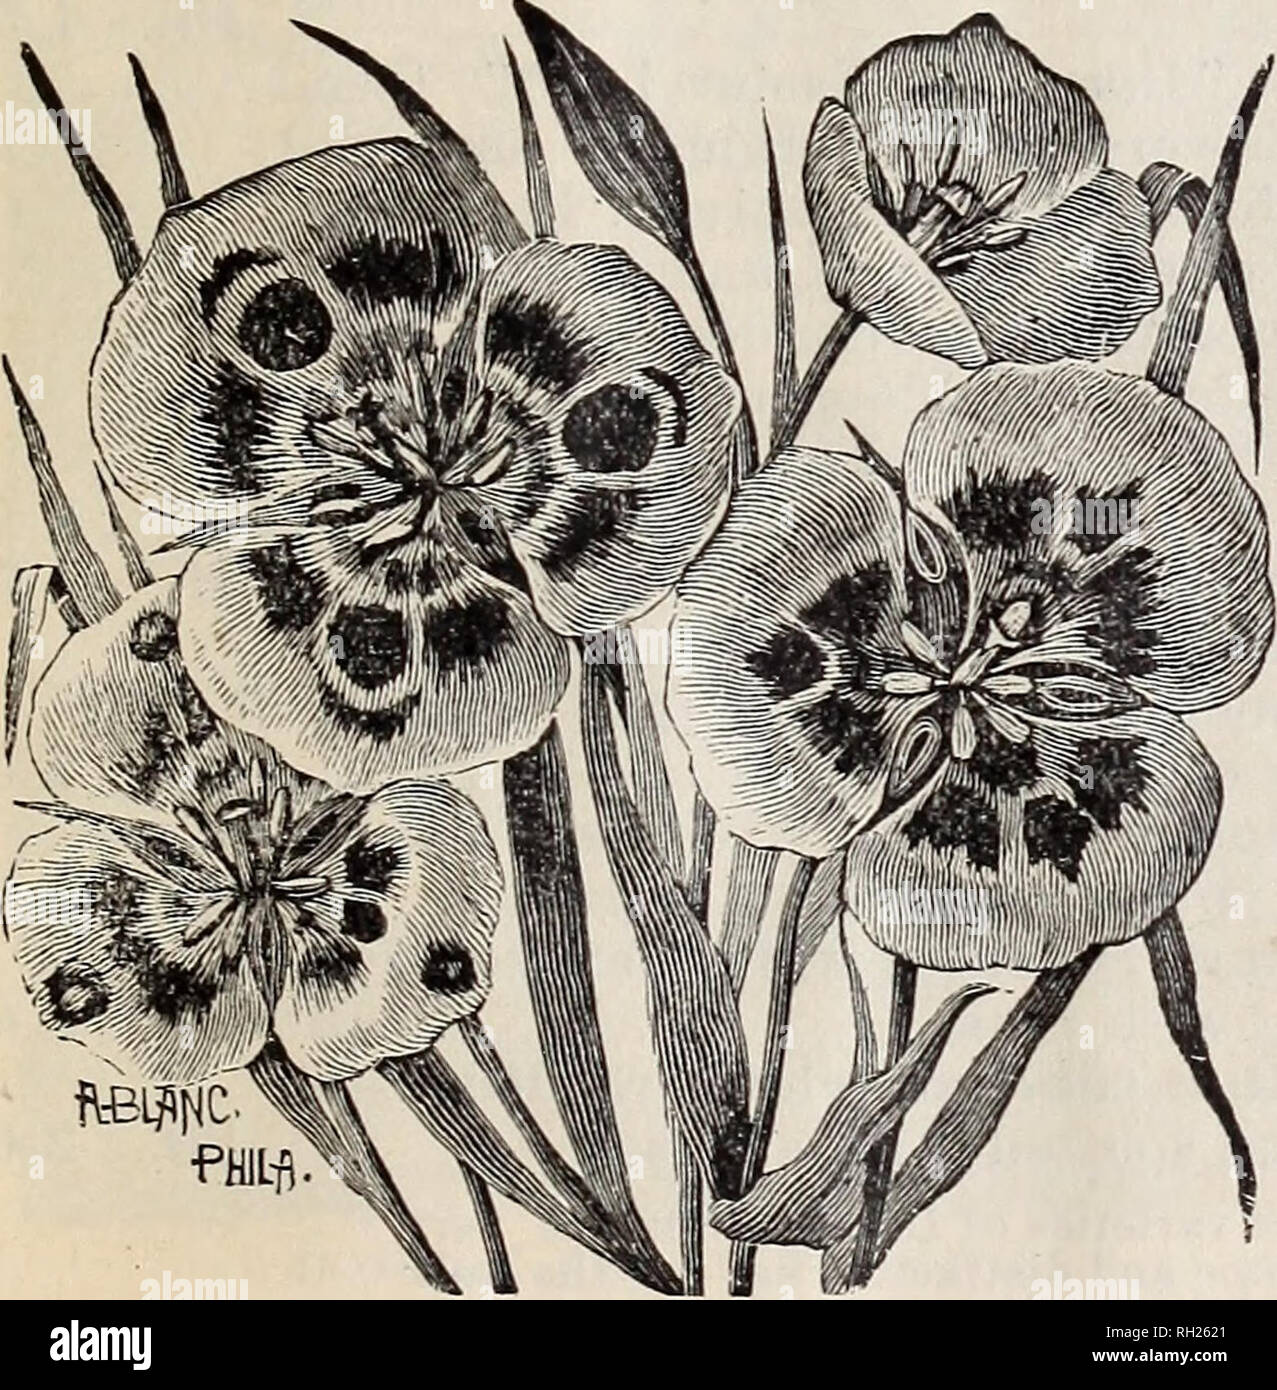 . Bulbs : autumn 1903. Horticulture Catalogs; Bulbs (Plants) Seeds Catalogs. 326-330 SOUTH MAIN ST., LOS ANGELES. 7 Calochortus.—Continued. Each. Plummerae, (C. Weedii Purpurascens) rich lavendar purple, lined with long yellow, silky hairs, large, extra choice 5 Splendens, pale lilac flowers, 2 to 3 inches across, lower part of petals cov- ered with long cobwebby hairs, a tall and stately species 5 Weedii, clear orange yellow, lined with silky hairs and dotted with brown, very fine and one of the best 5 Venustus, petals white or pale lilac, with a reddish spot at top, a brown- yellow center an Stock Photo